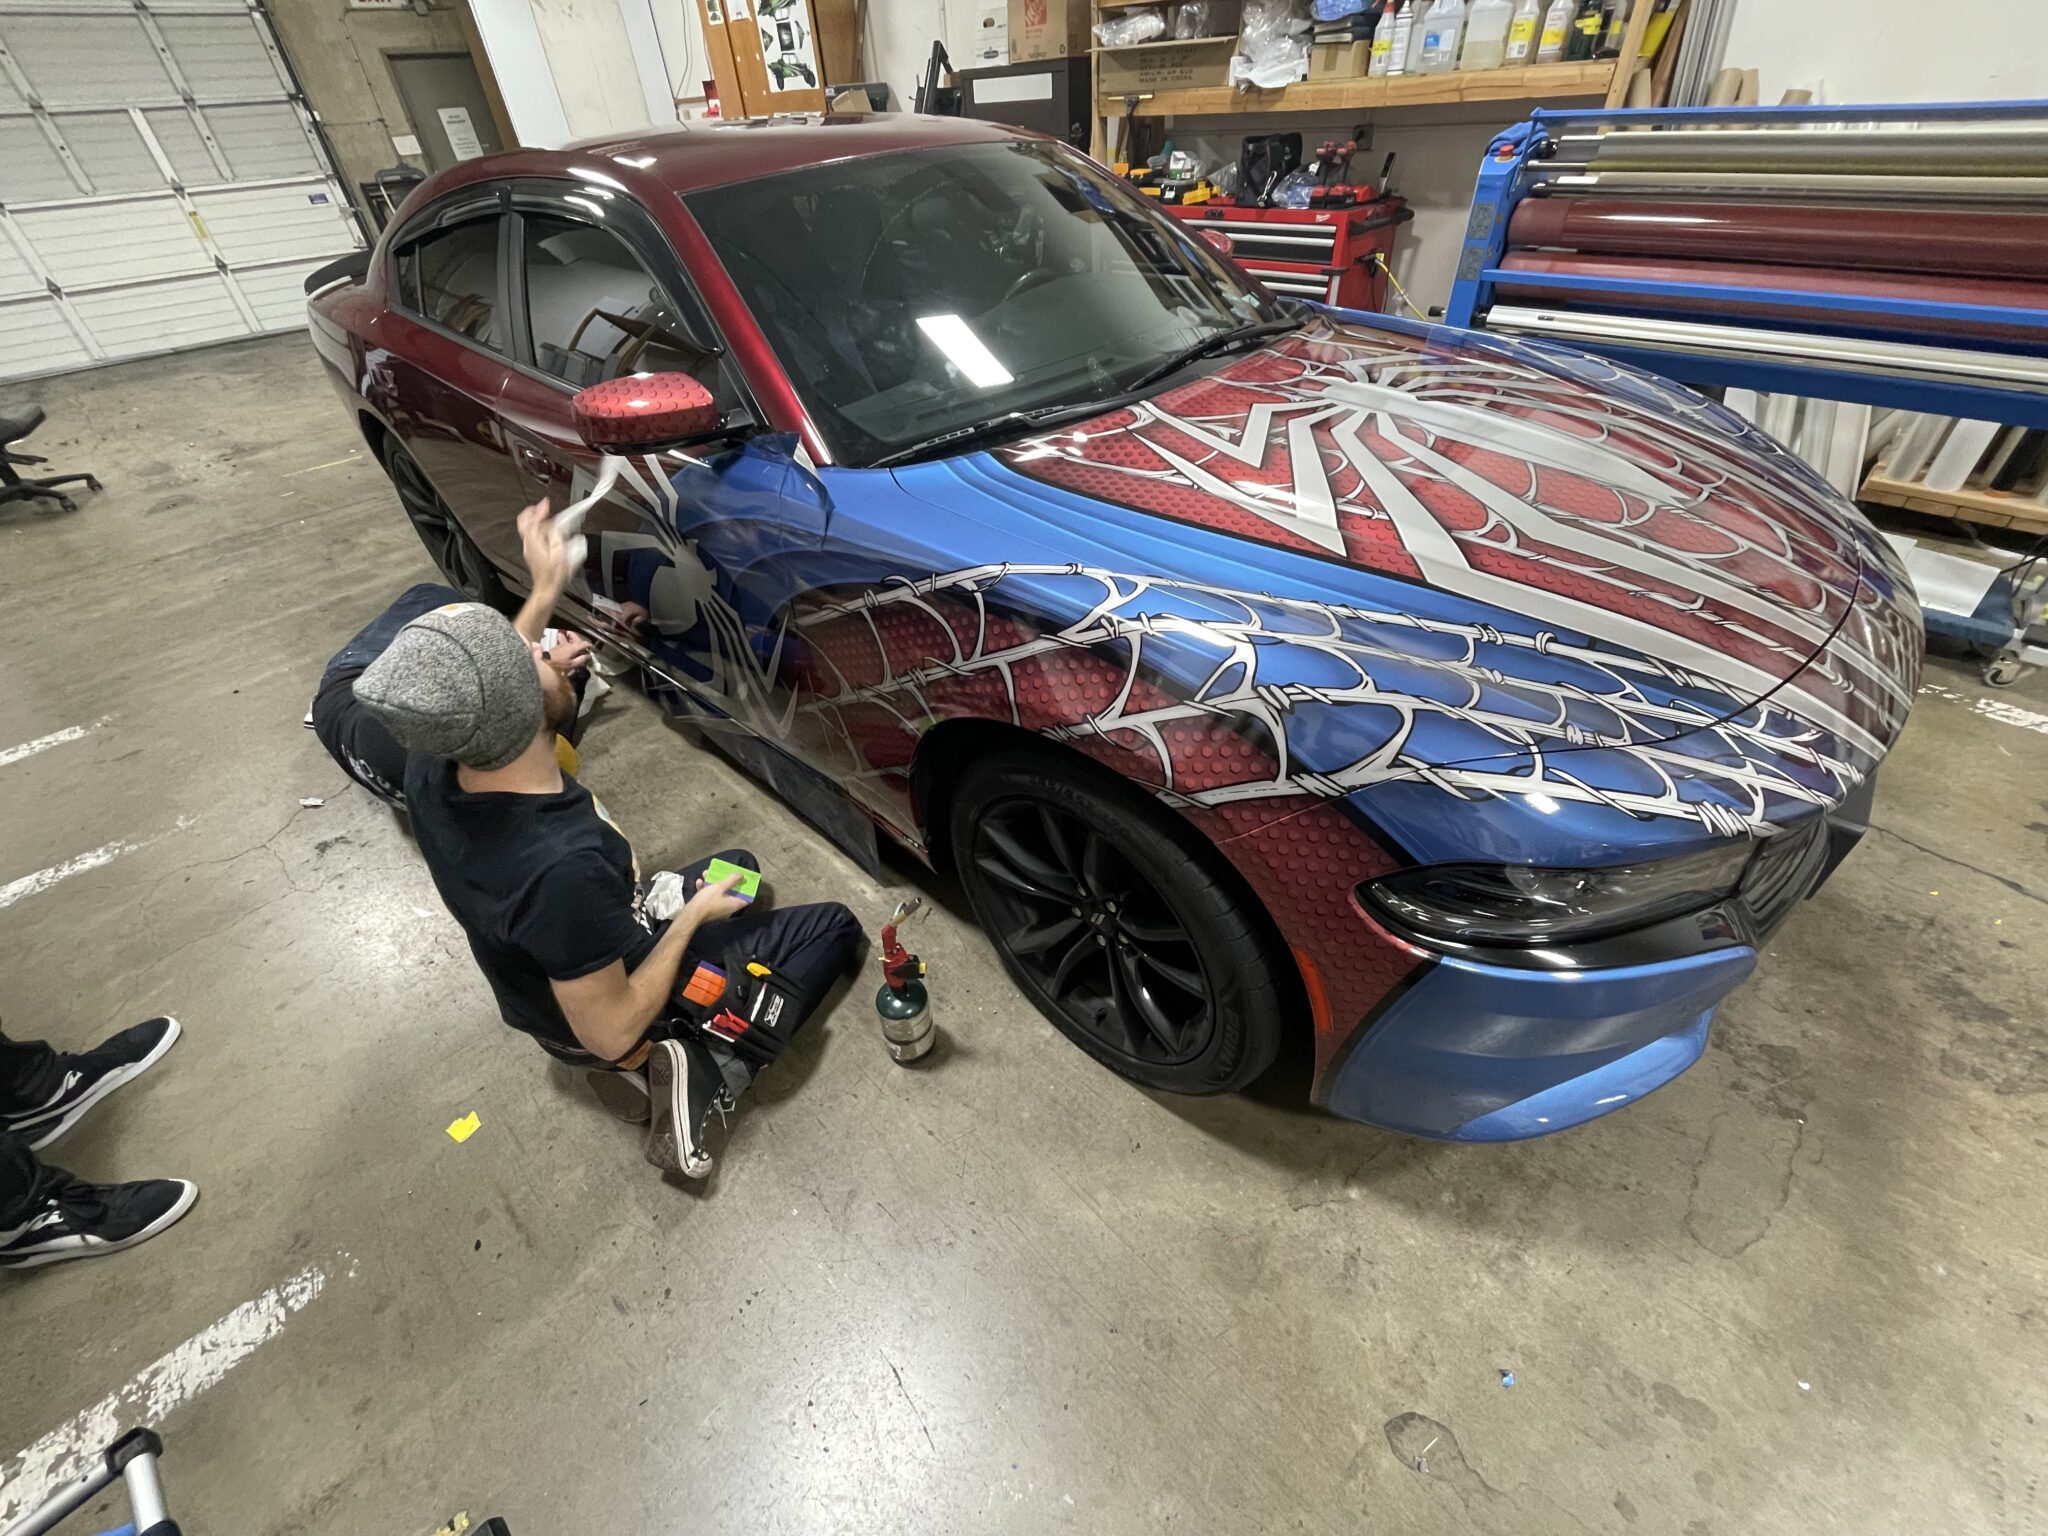 Cool Car Wraps with a Spiderman Theme